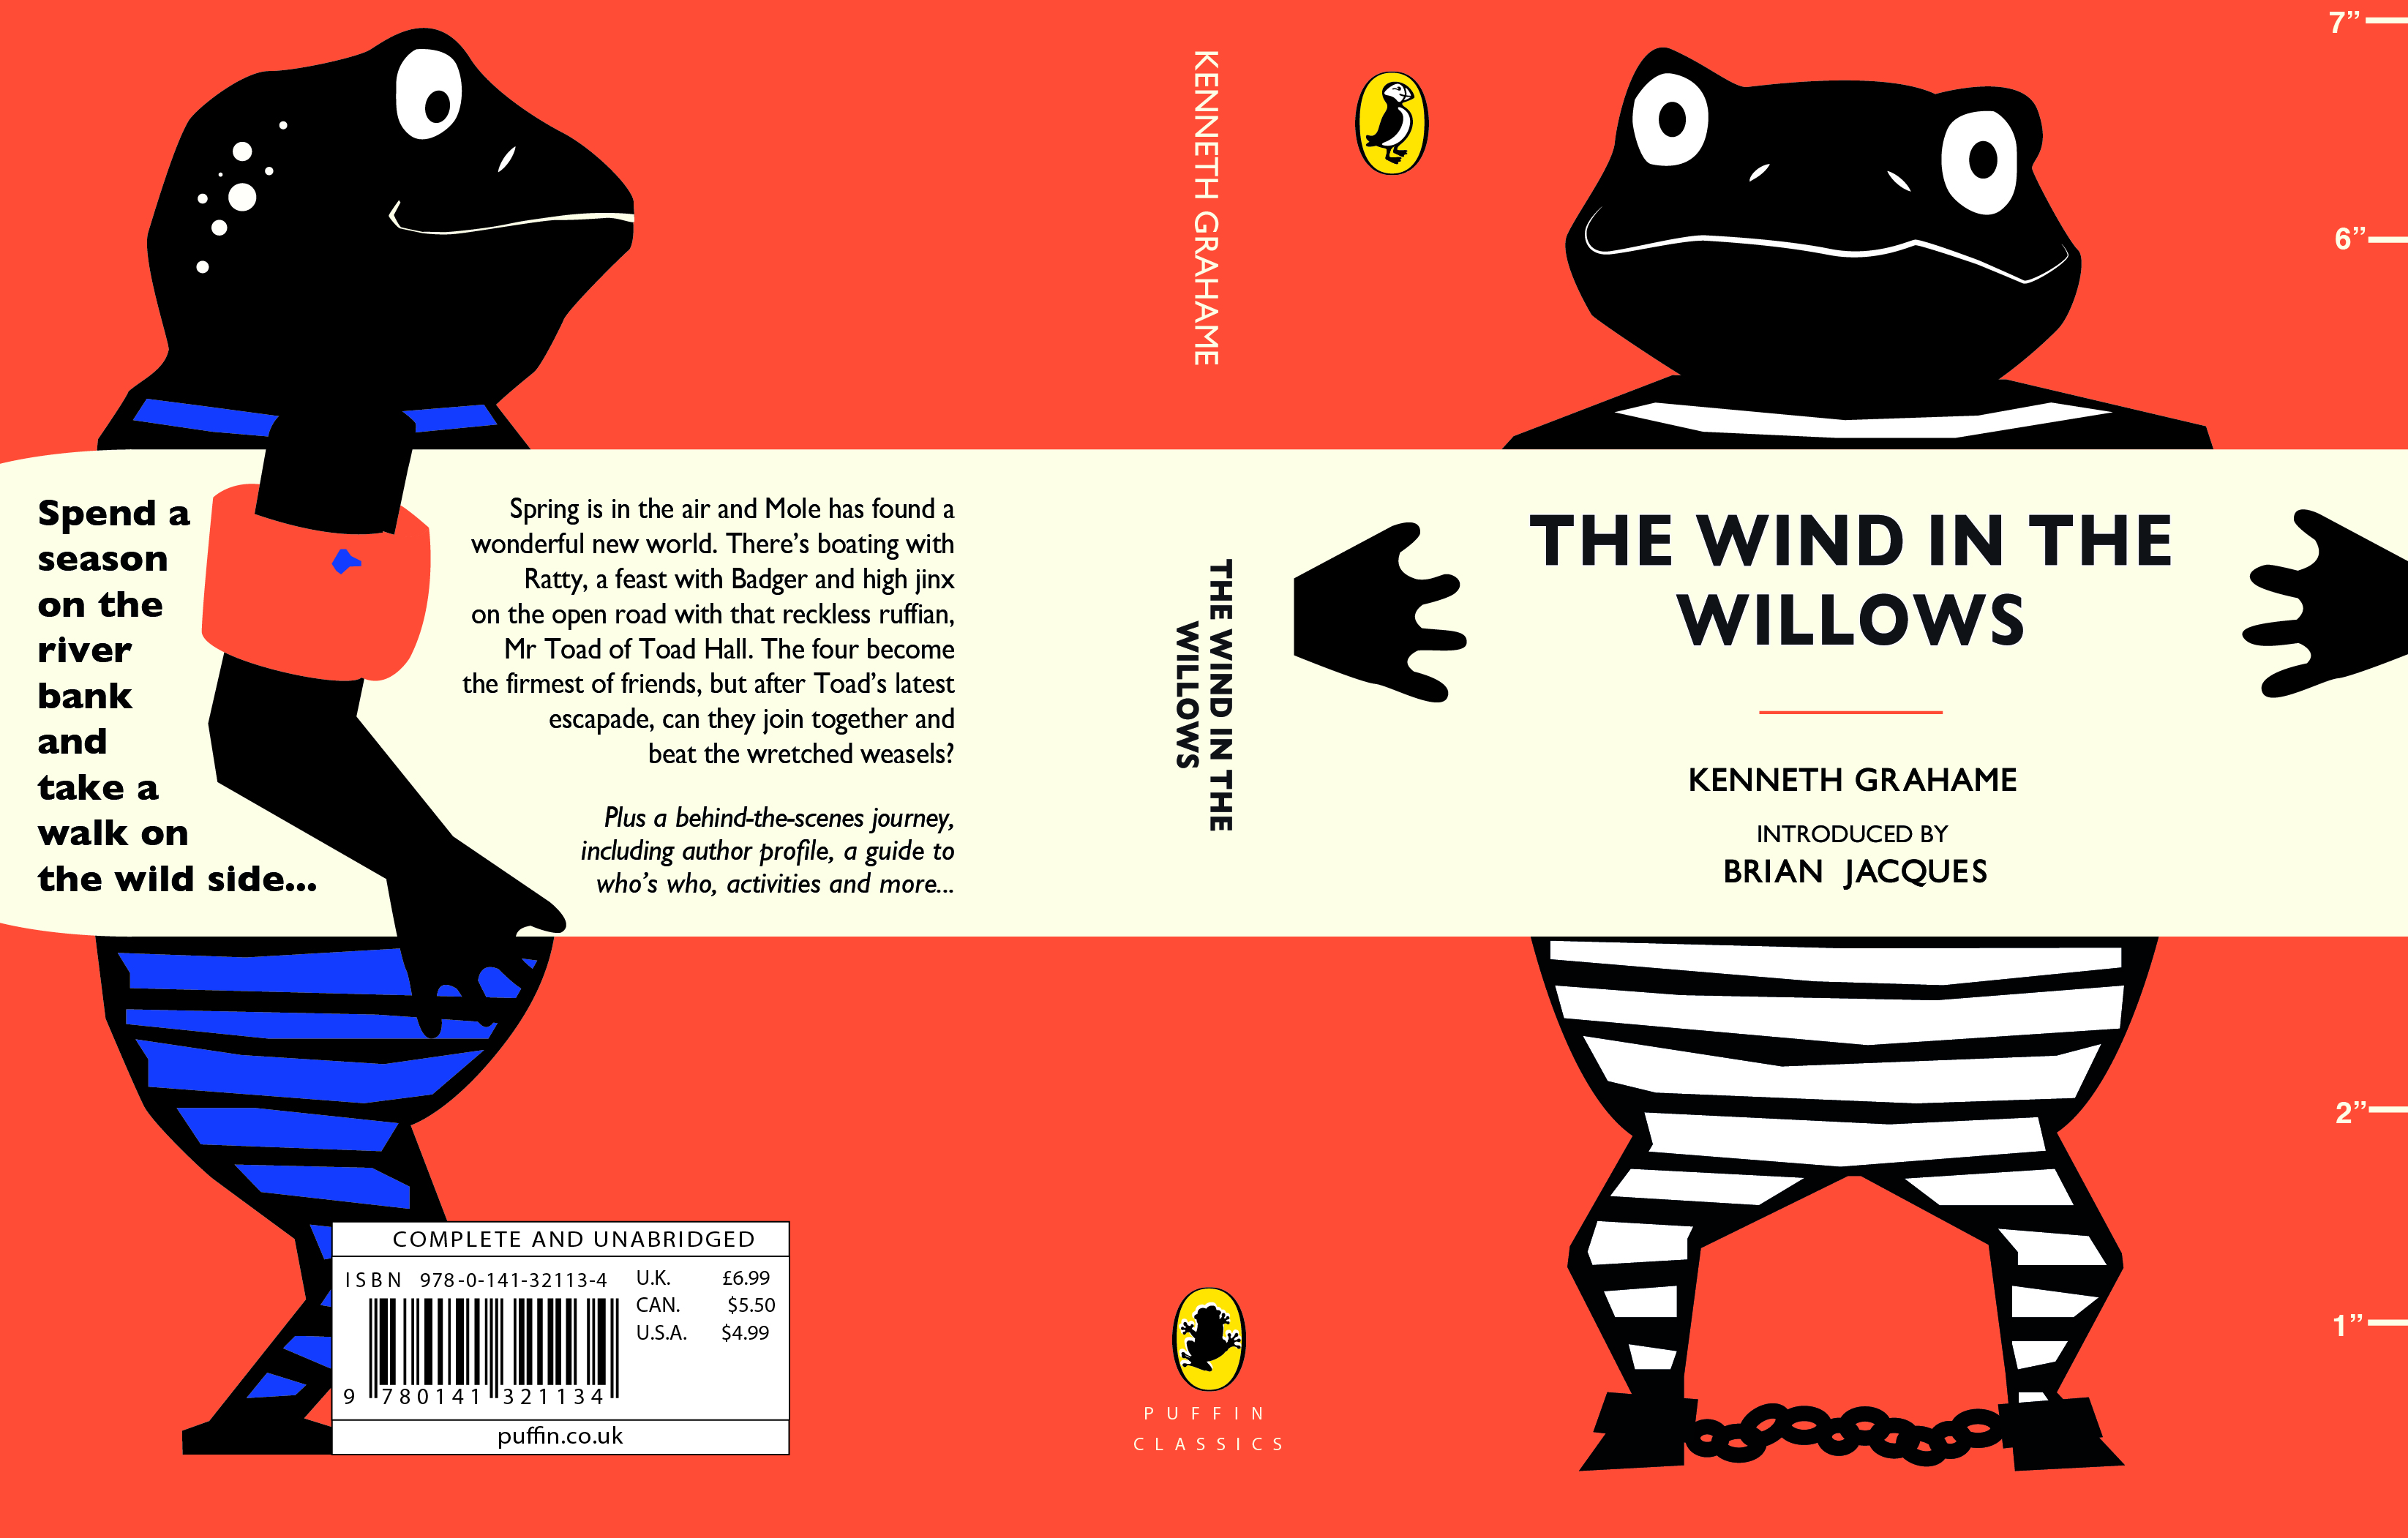 The Wind in the Willows book cover design